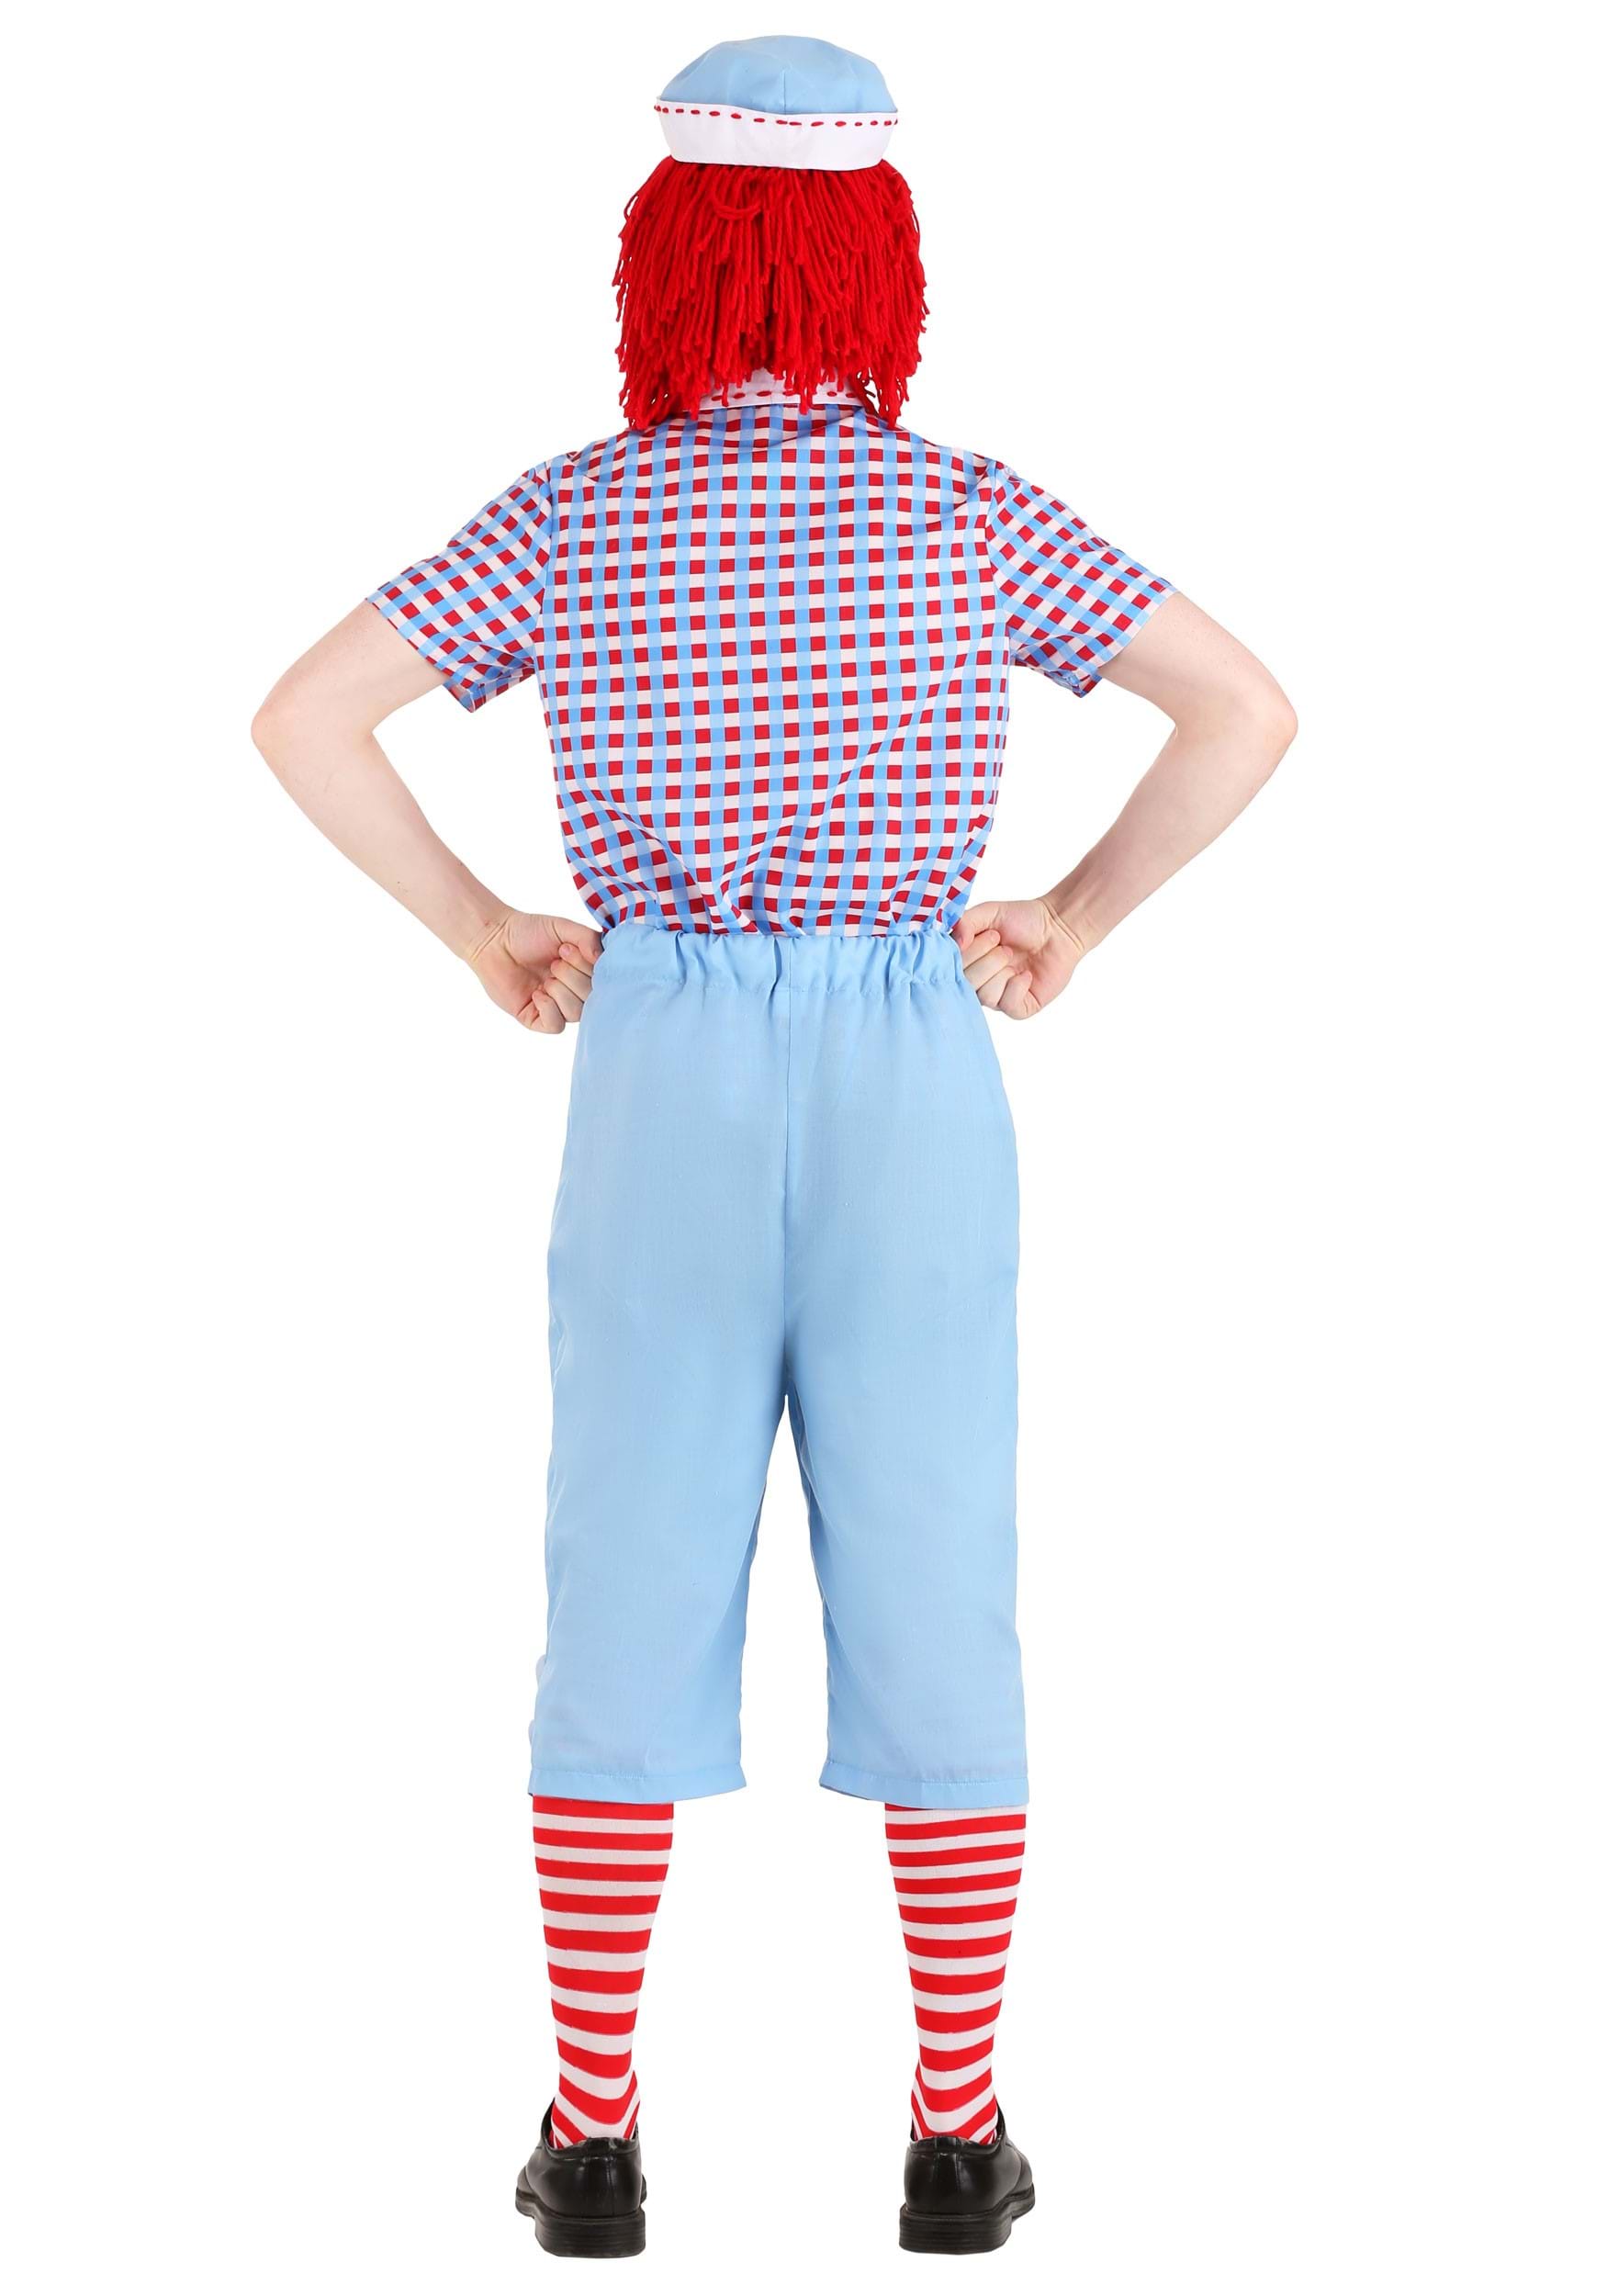 Raggedy Andy Costume For Men